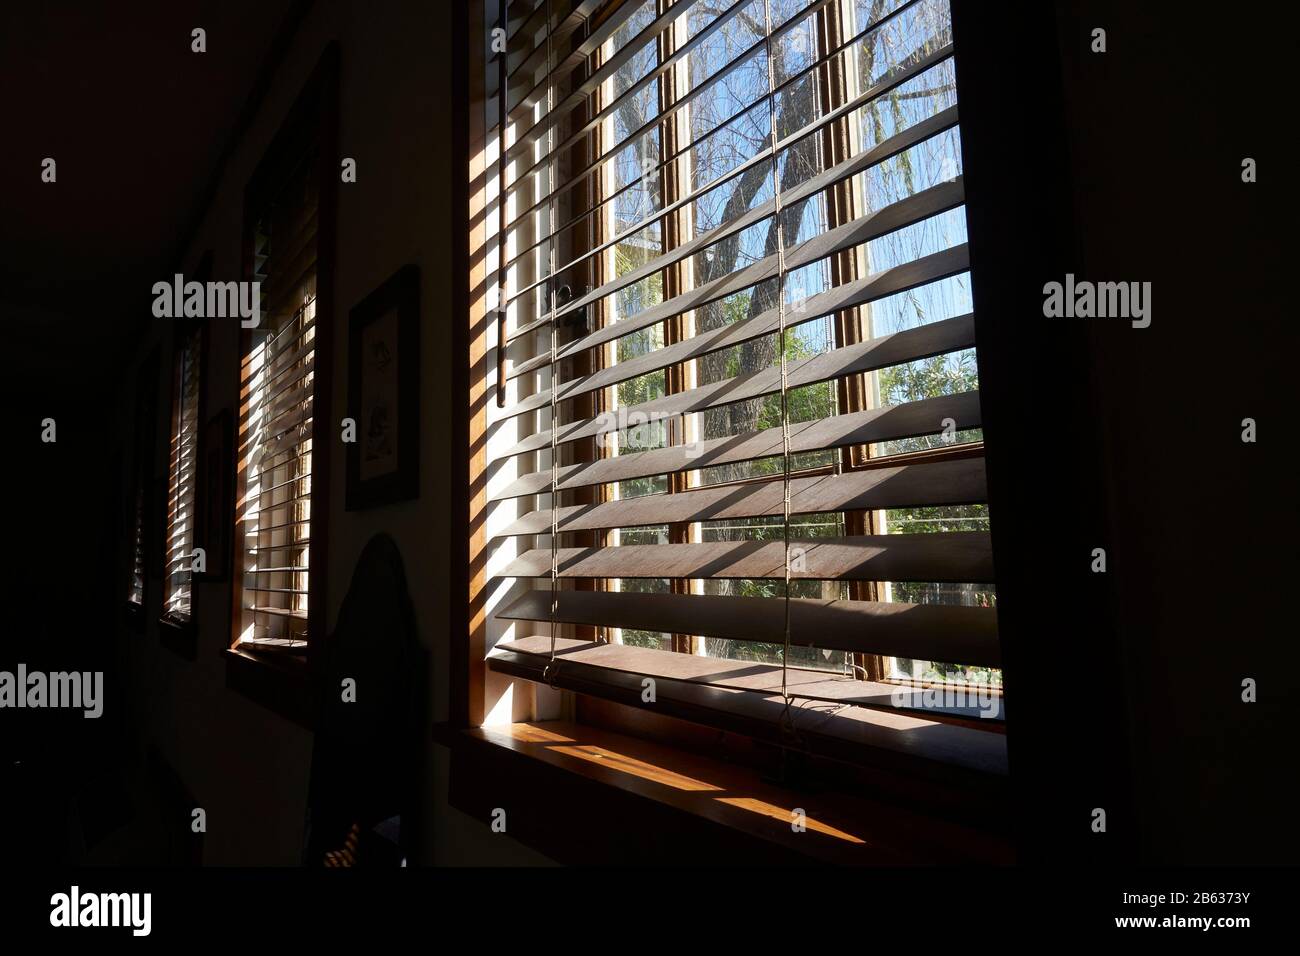 Windows with wood blinds. Stock Photo